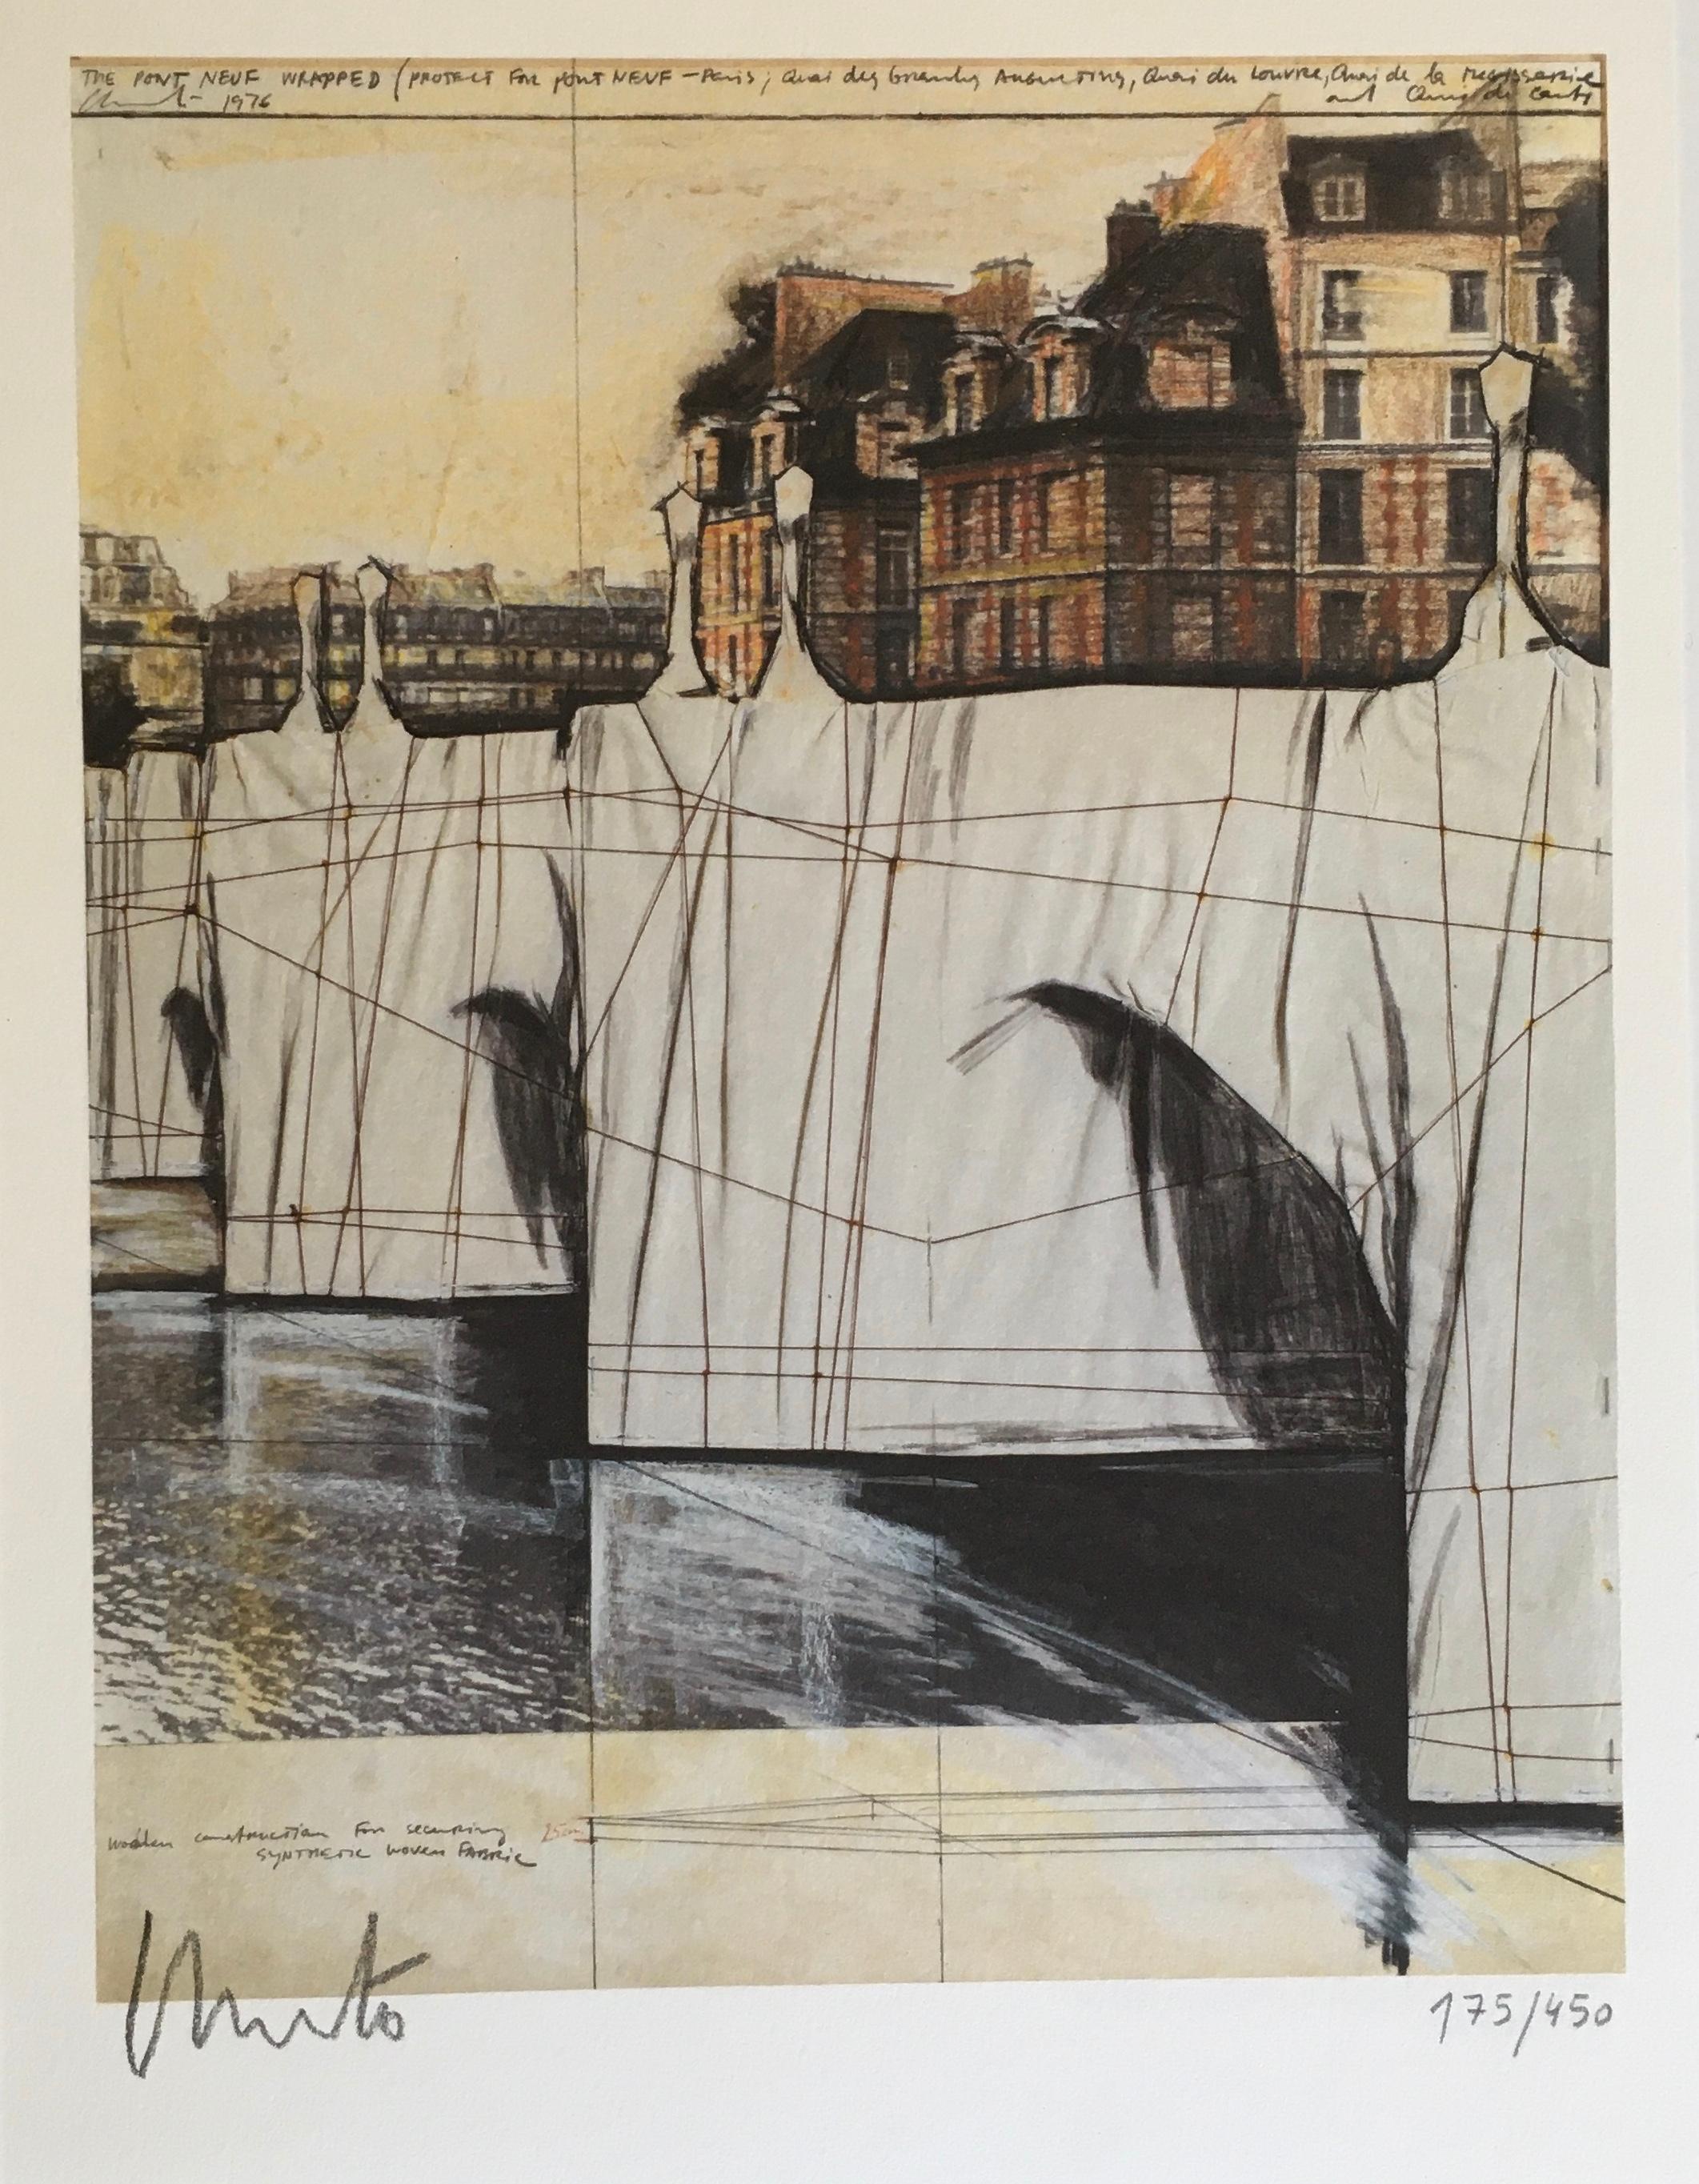 Christo and Jeanne-Claude Landscape Print - Christo et Jenne Claude, Paris! The Pont-Neuf Wrapped, Signed Print and Catalog